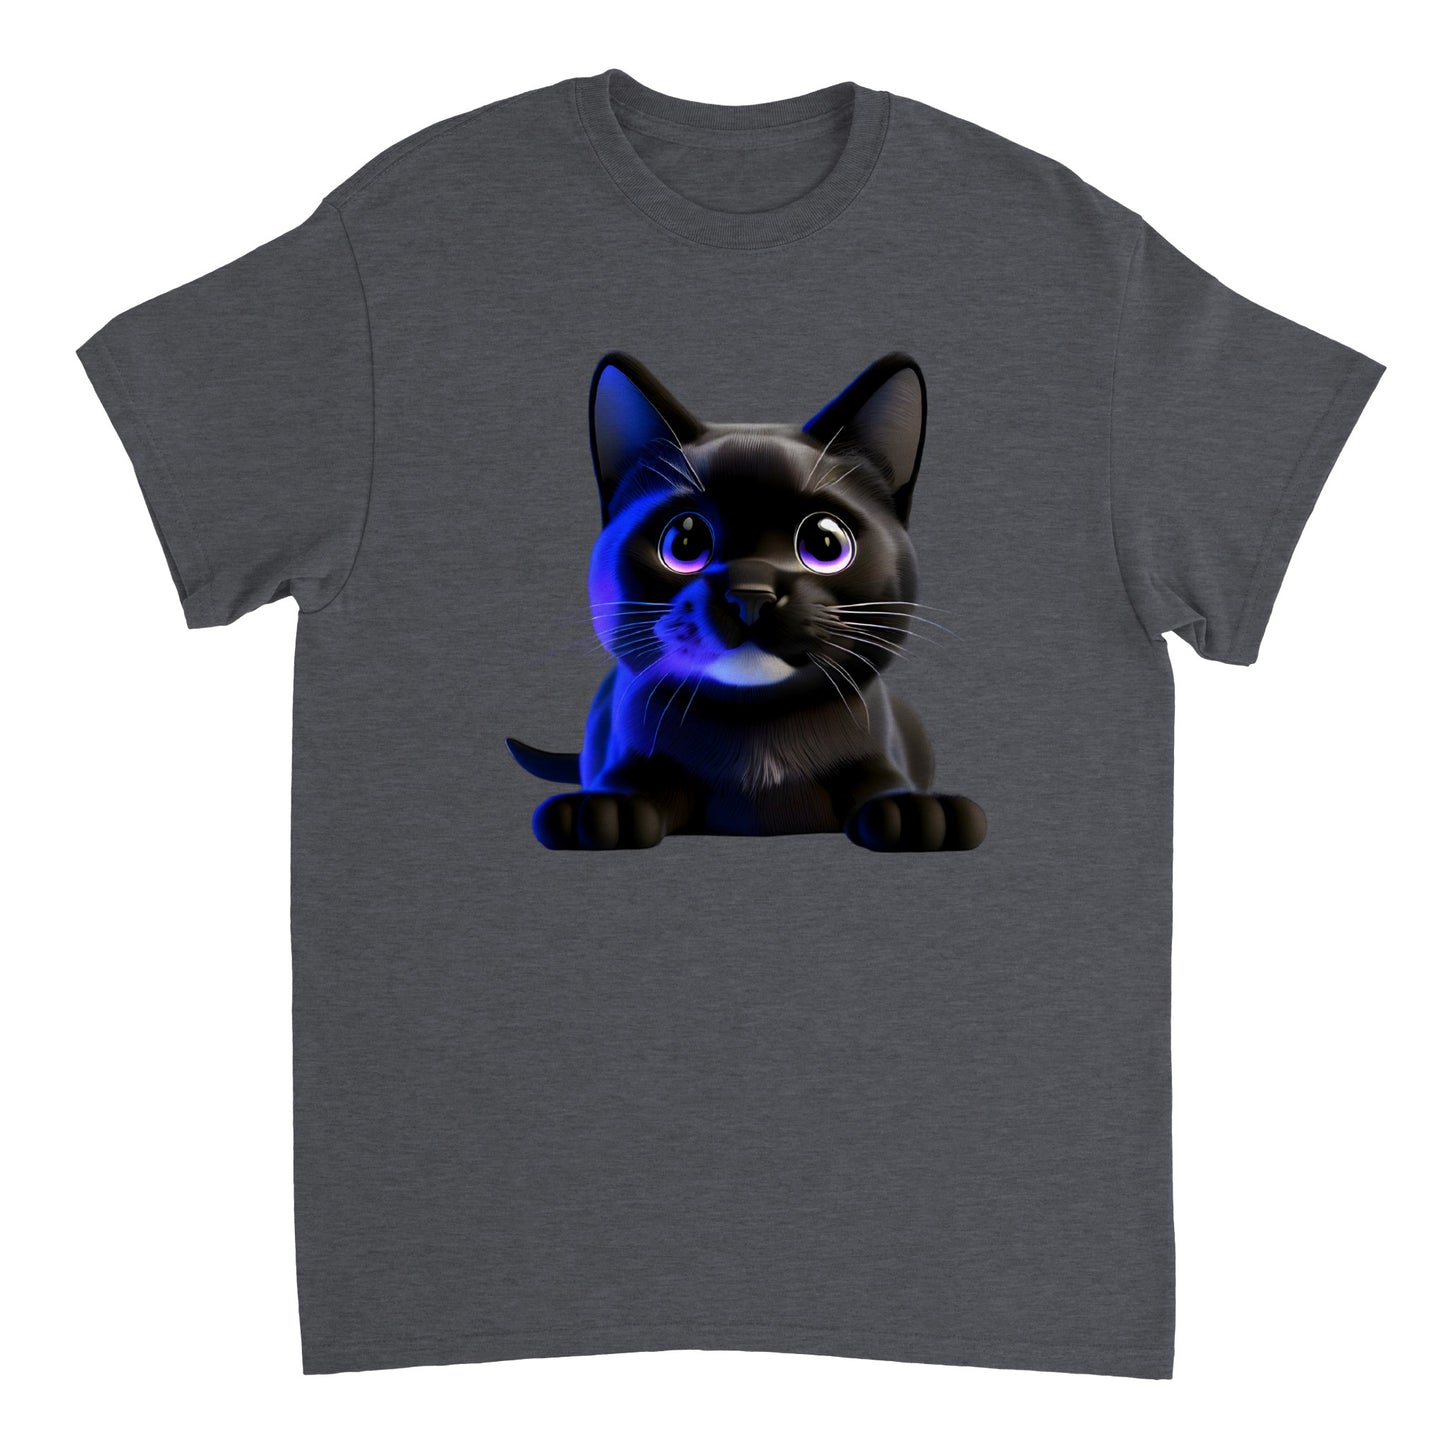 Adorable, Cool, Cute Cats and Kittens Toy - Heavyweight Unisex Crewneck T-shirt 11